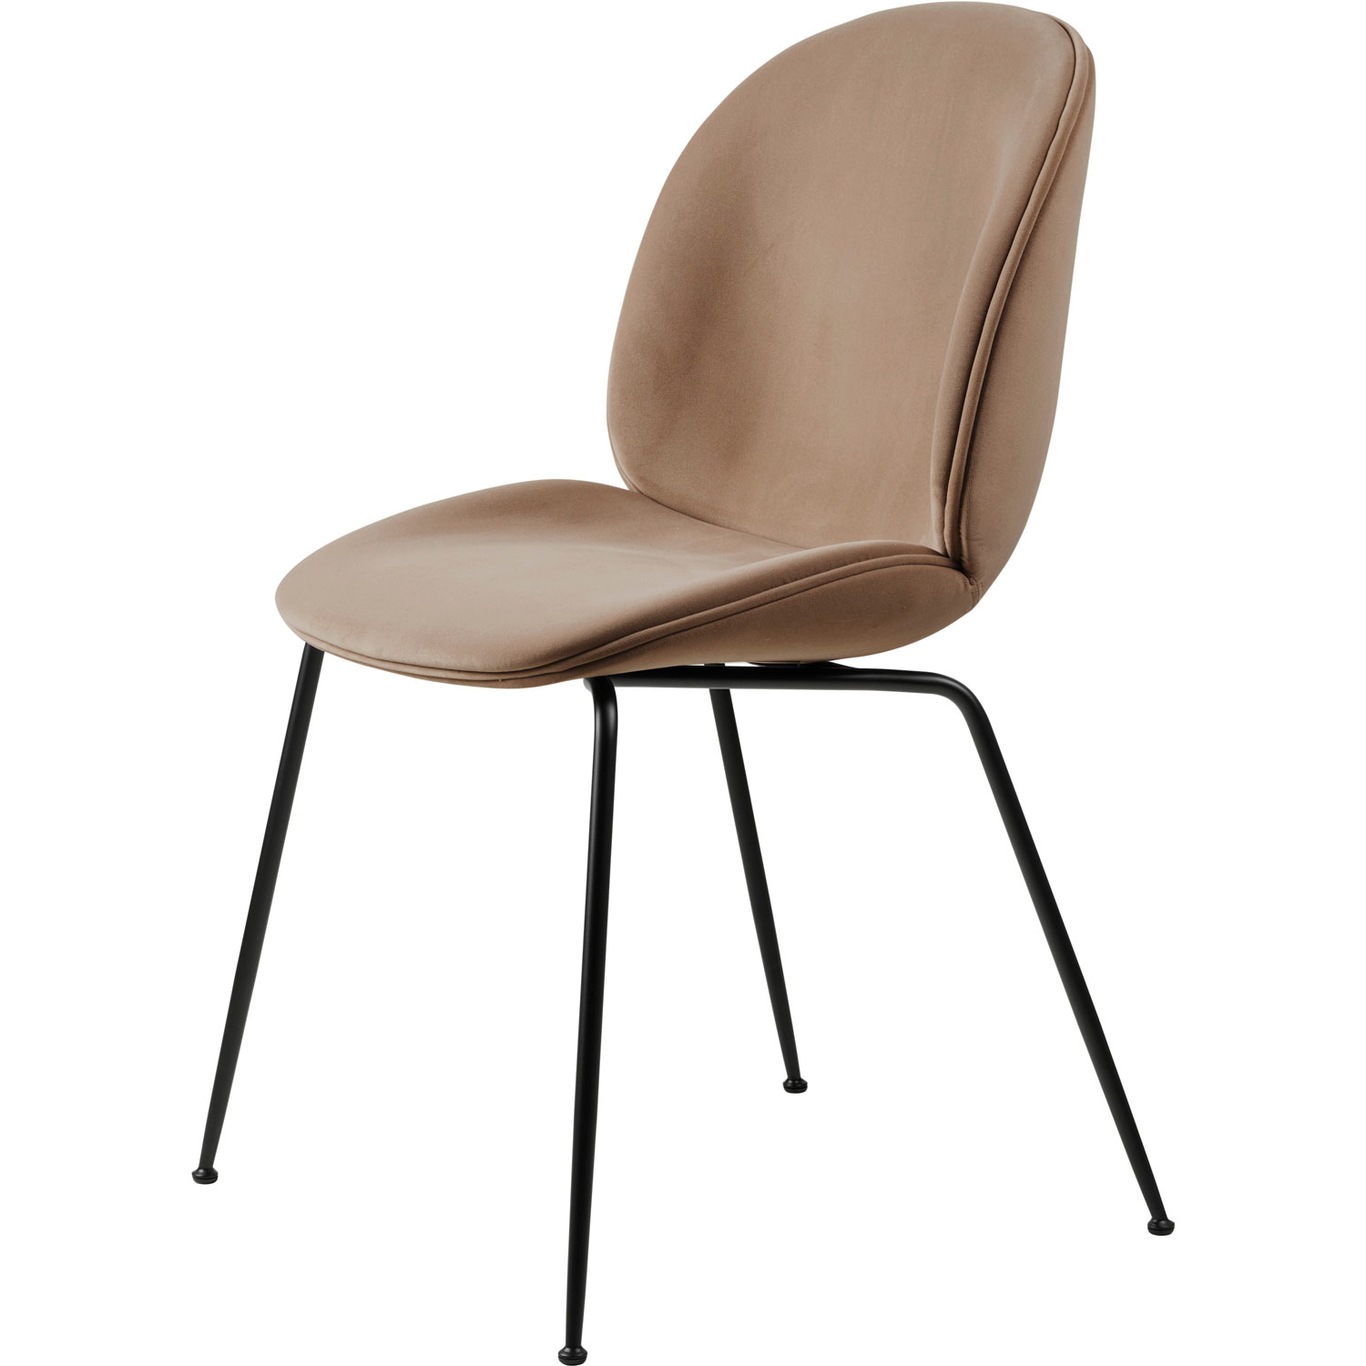 Beetle Chair Upholstered / Conical Base, Sunday 034